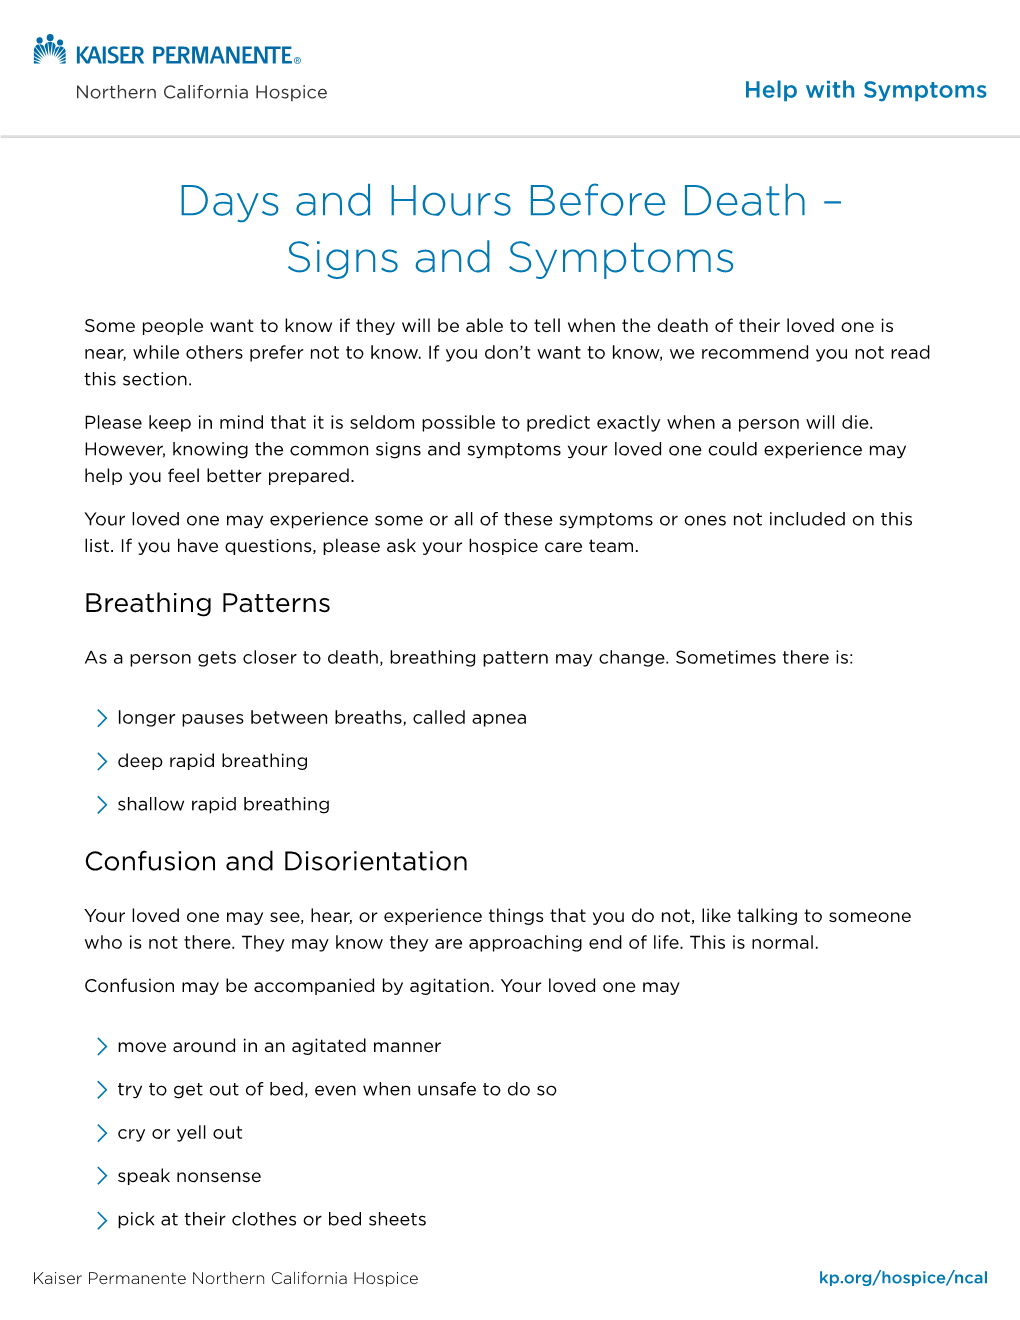 Days and Hours Before Death – Signs and Symptoms